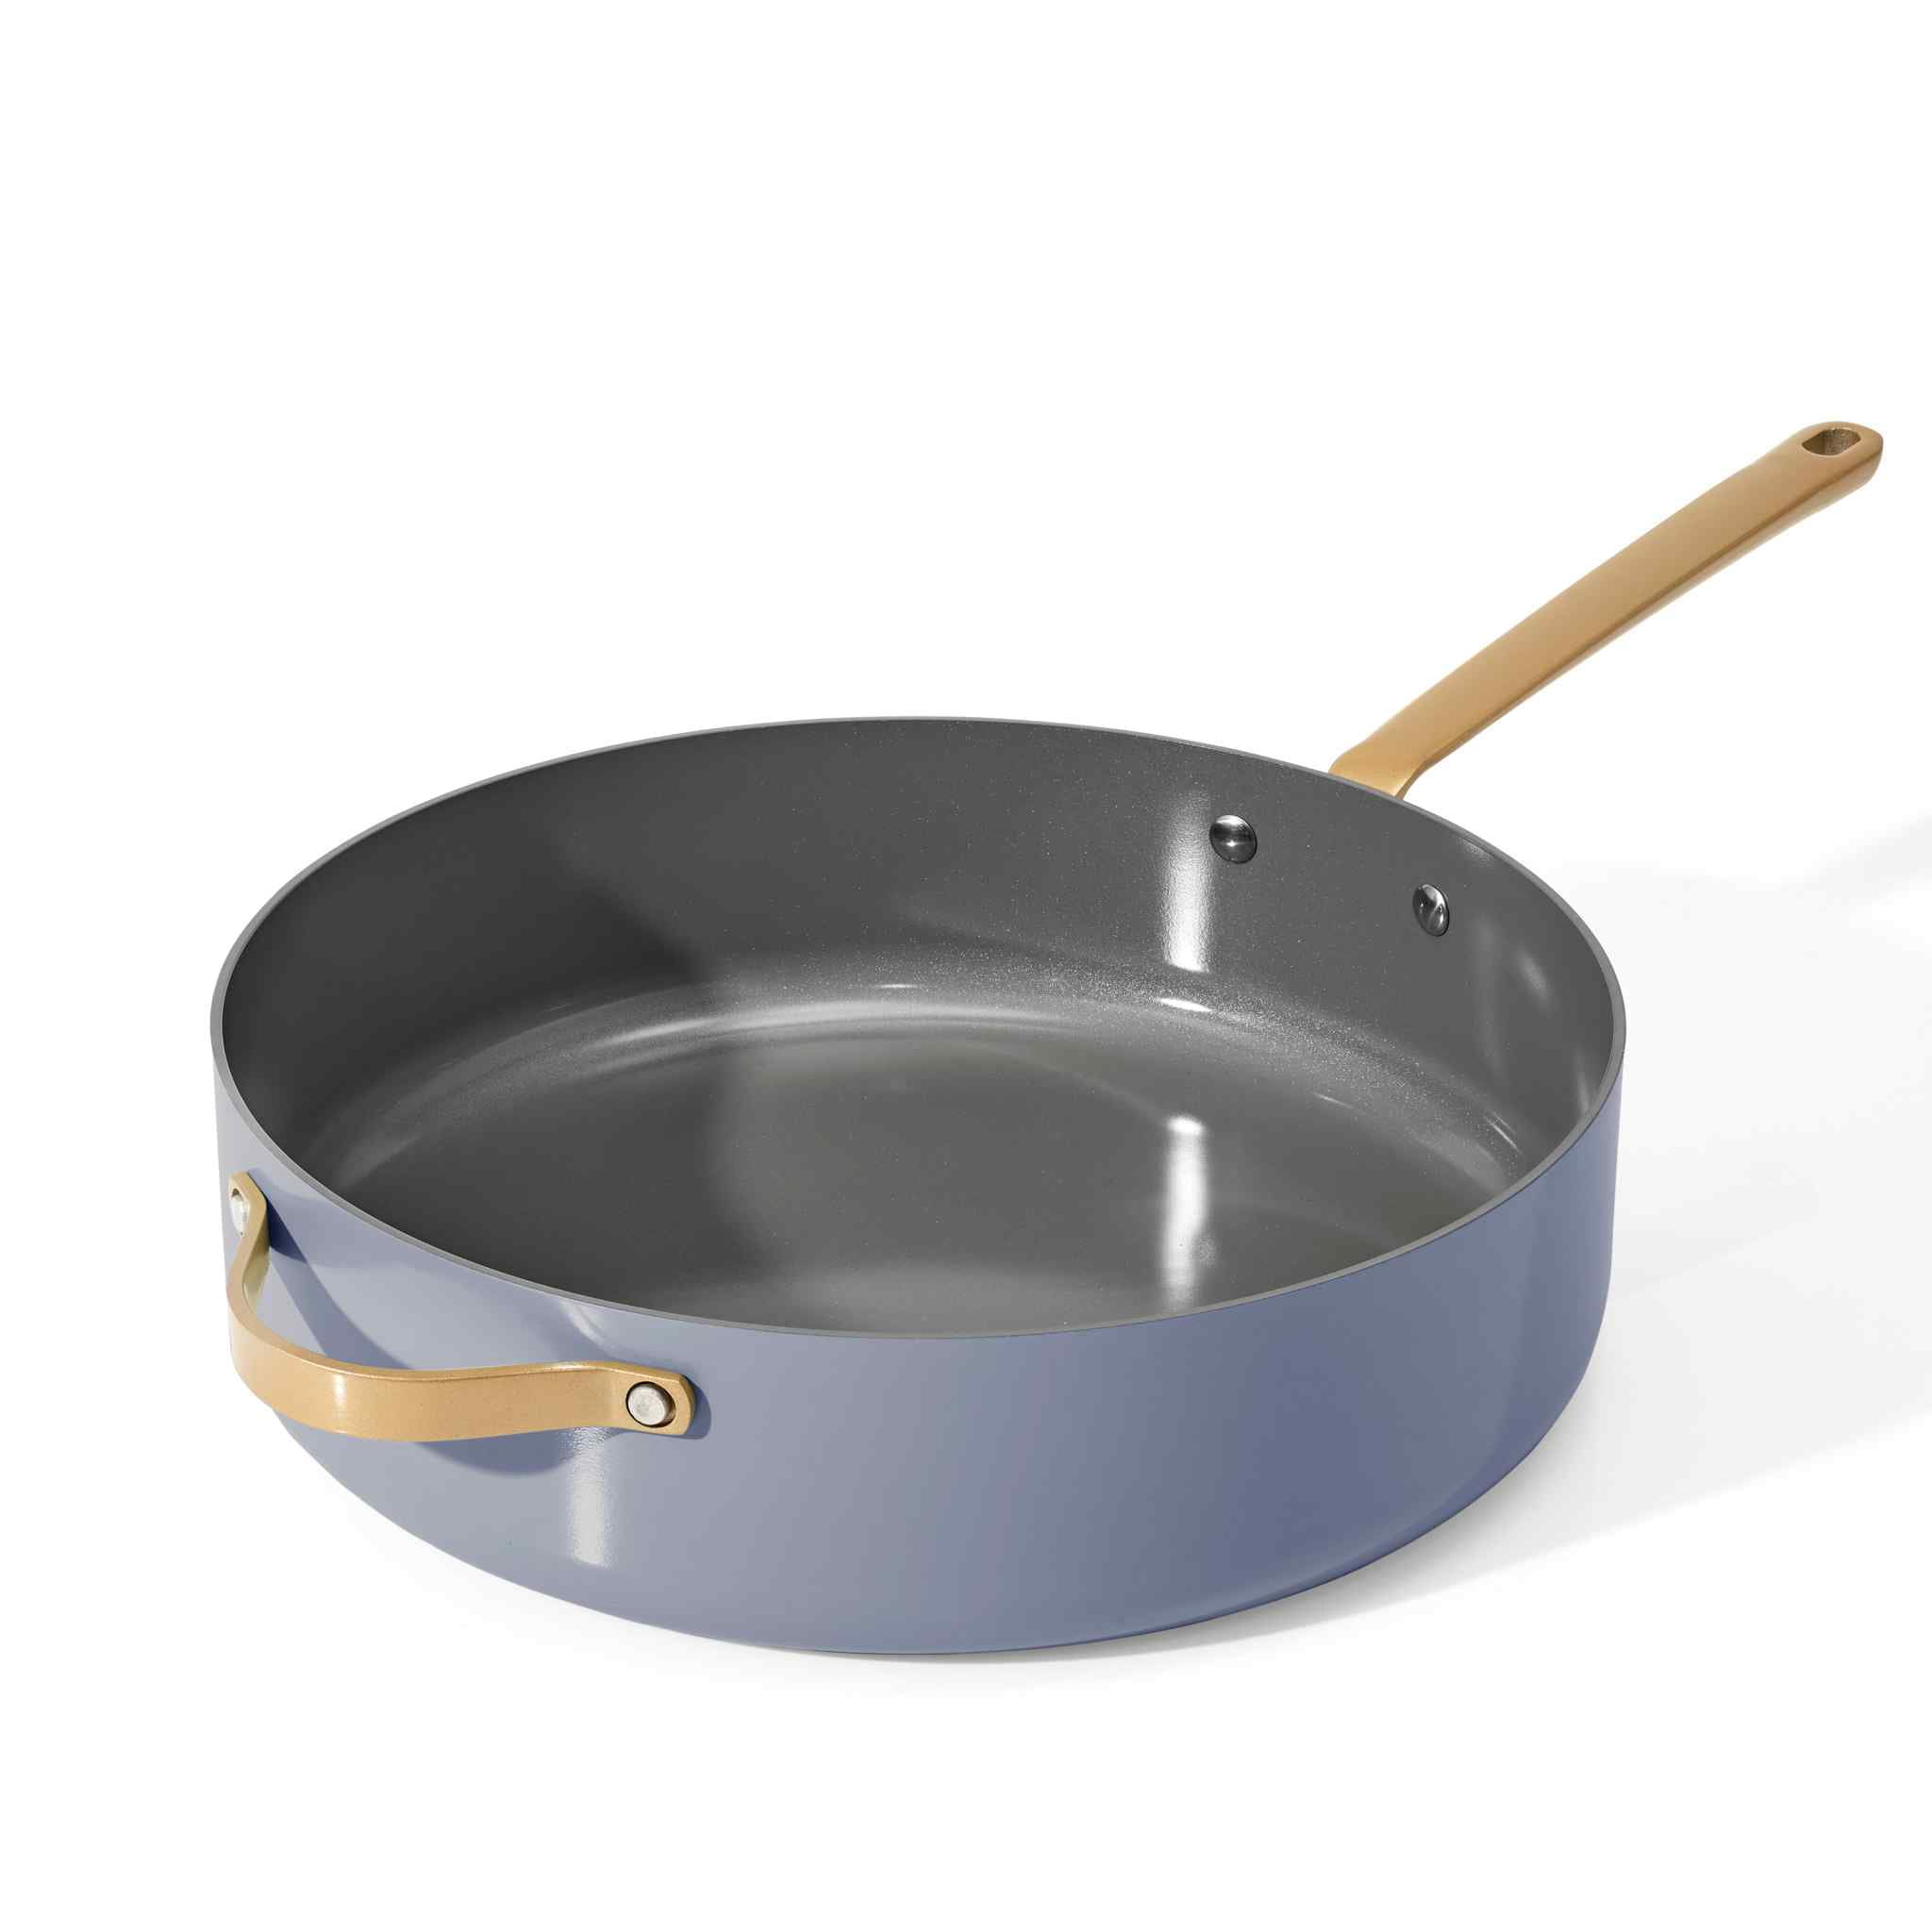 This Ceramic Nonstick Saute Pan Is the One Pot People Use for